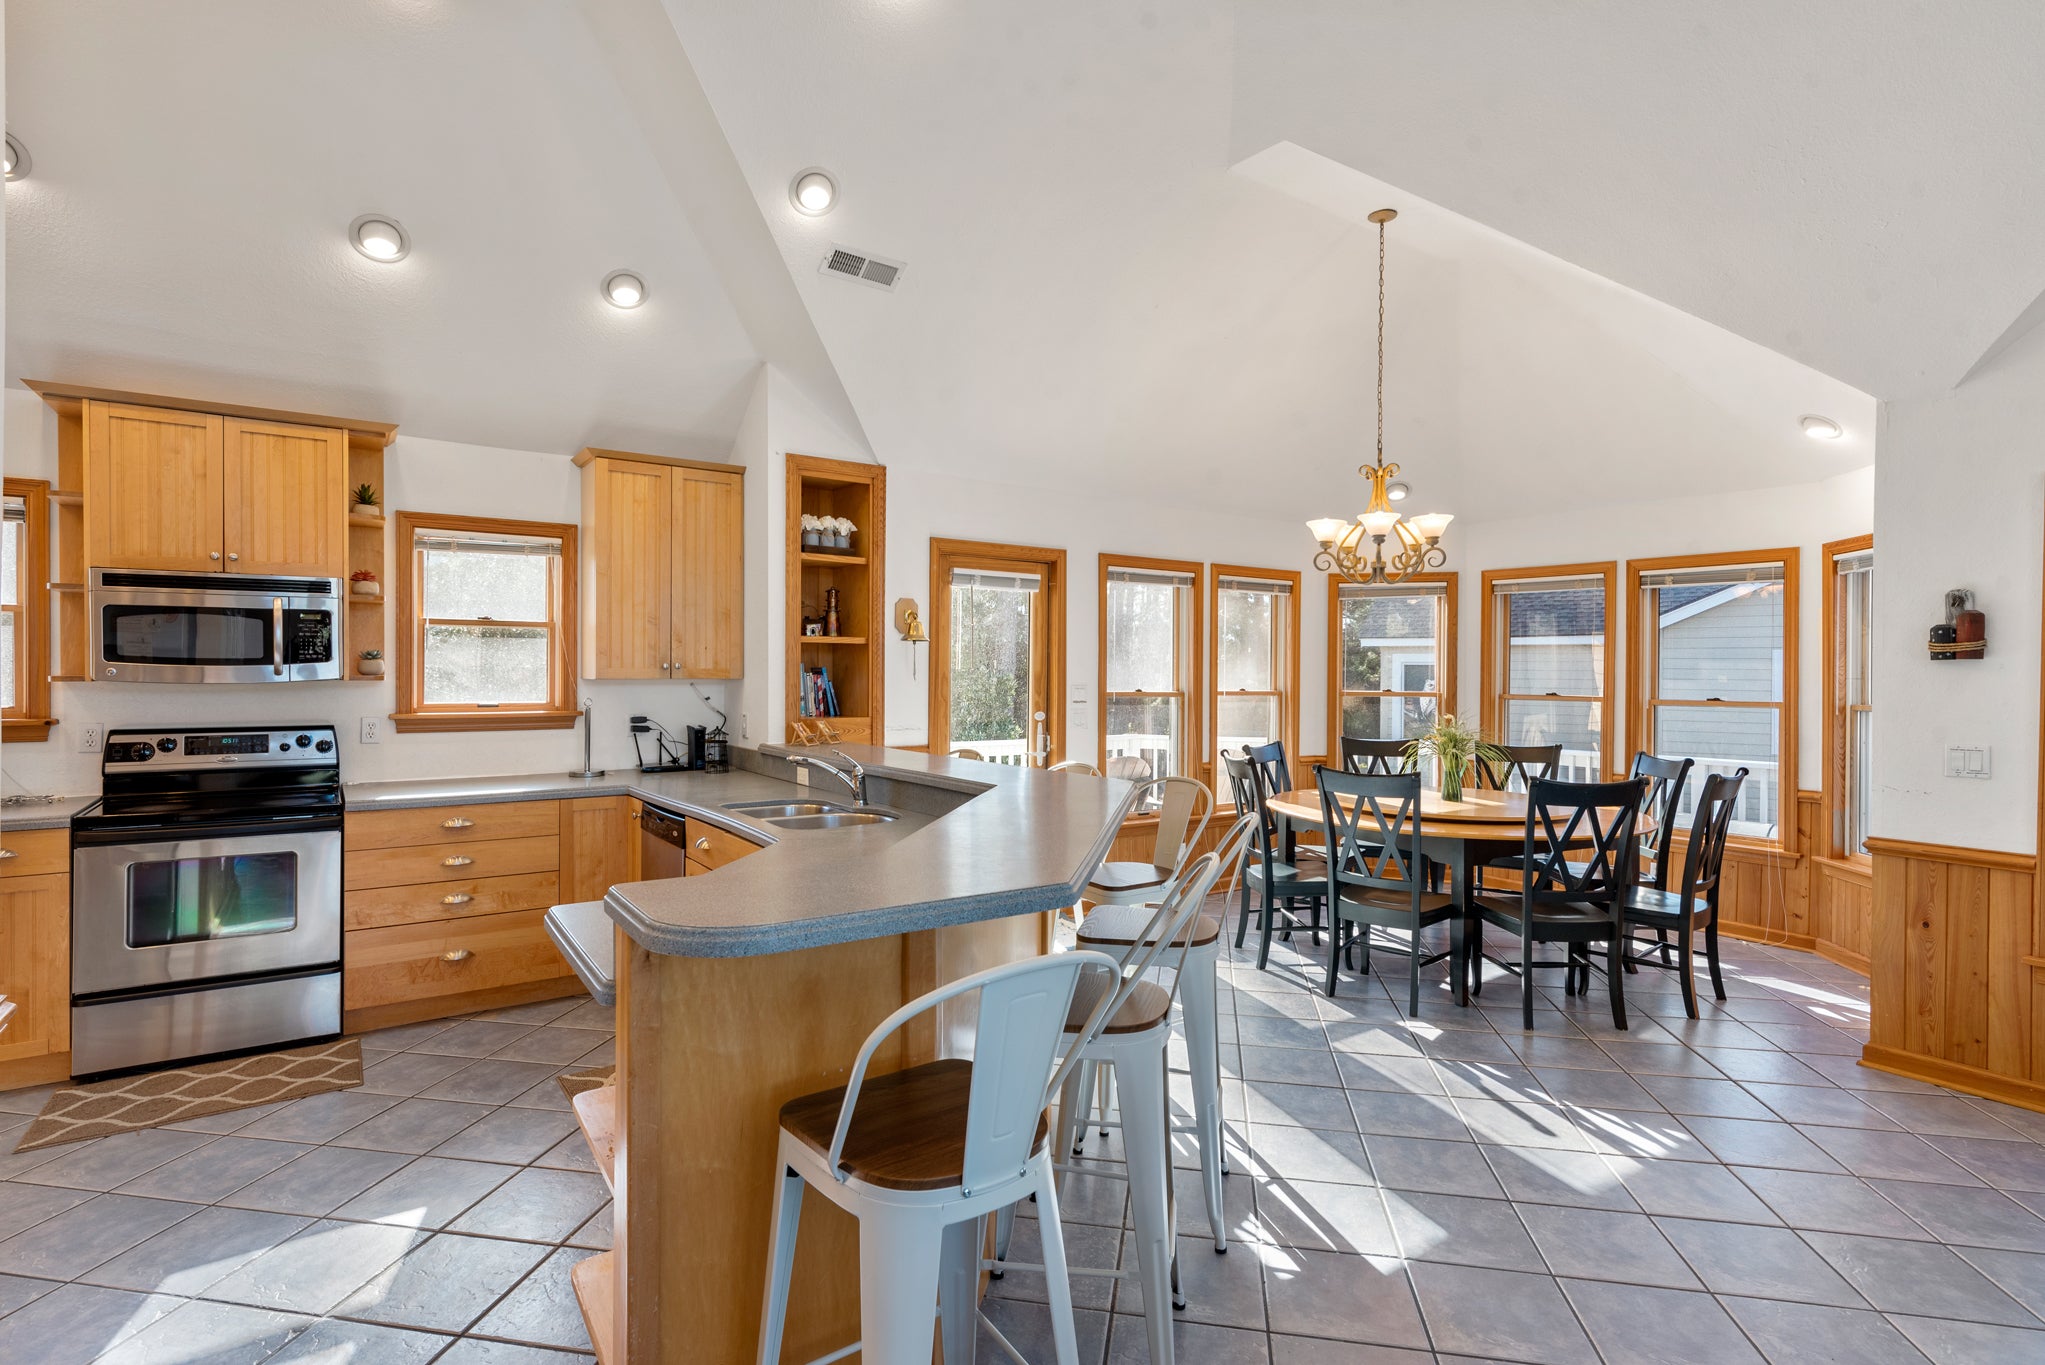 CL328: Irish Tides | Top Level Dining Area and Kitchen